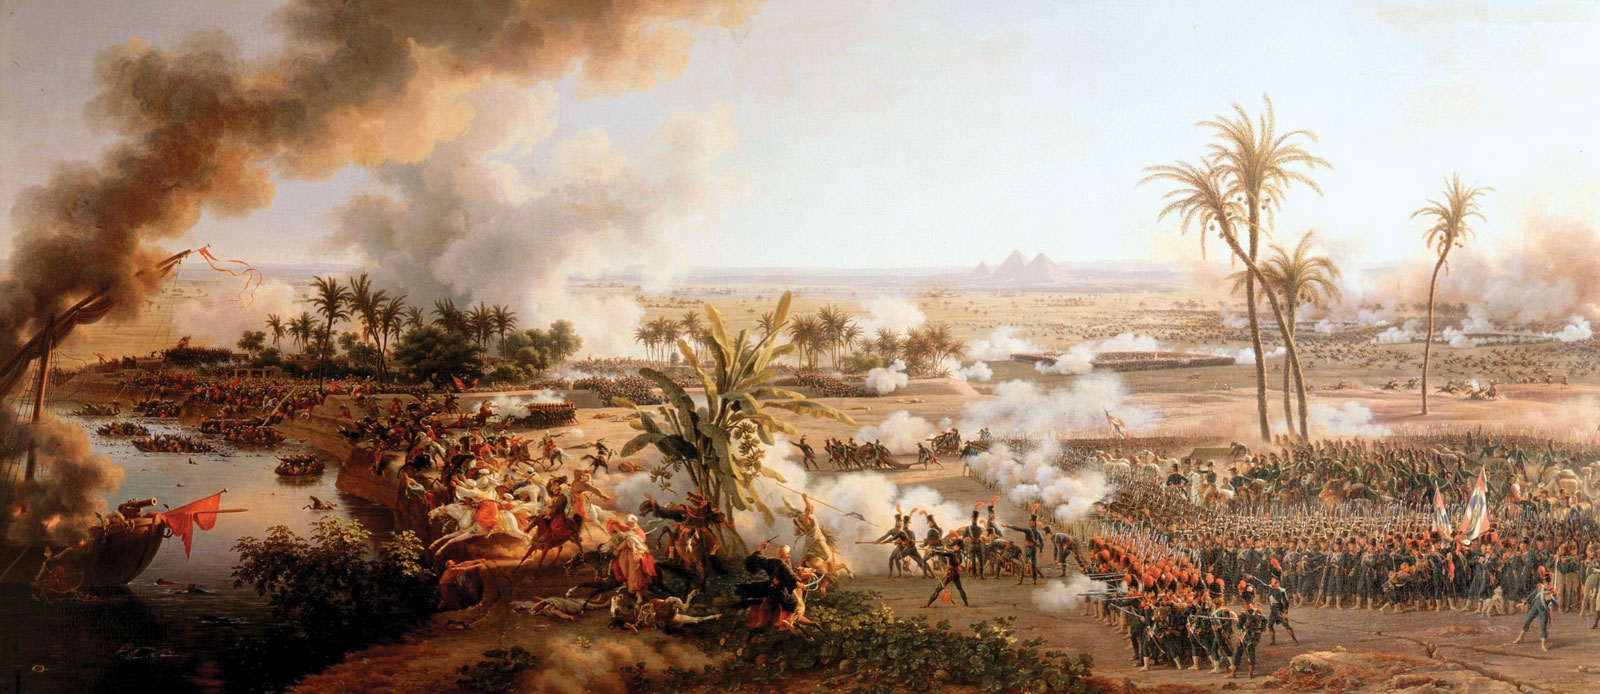 Napoleons Egyptian Campaign and the Decline of the Ottoman Empire I